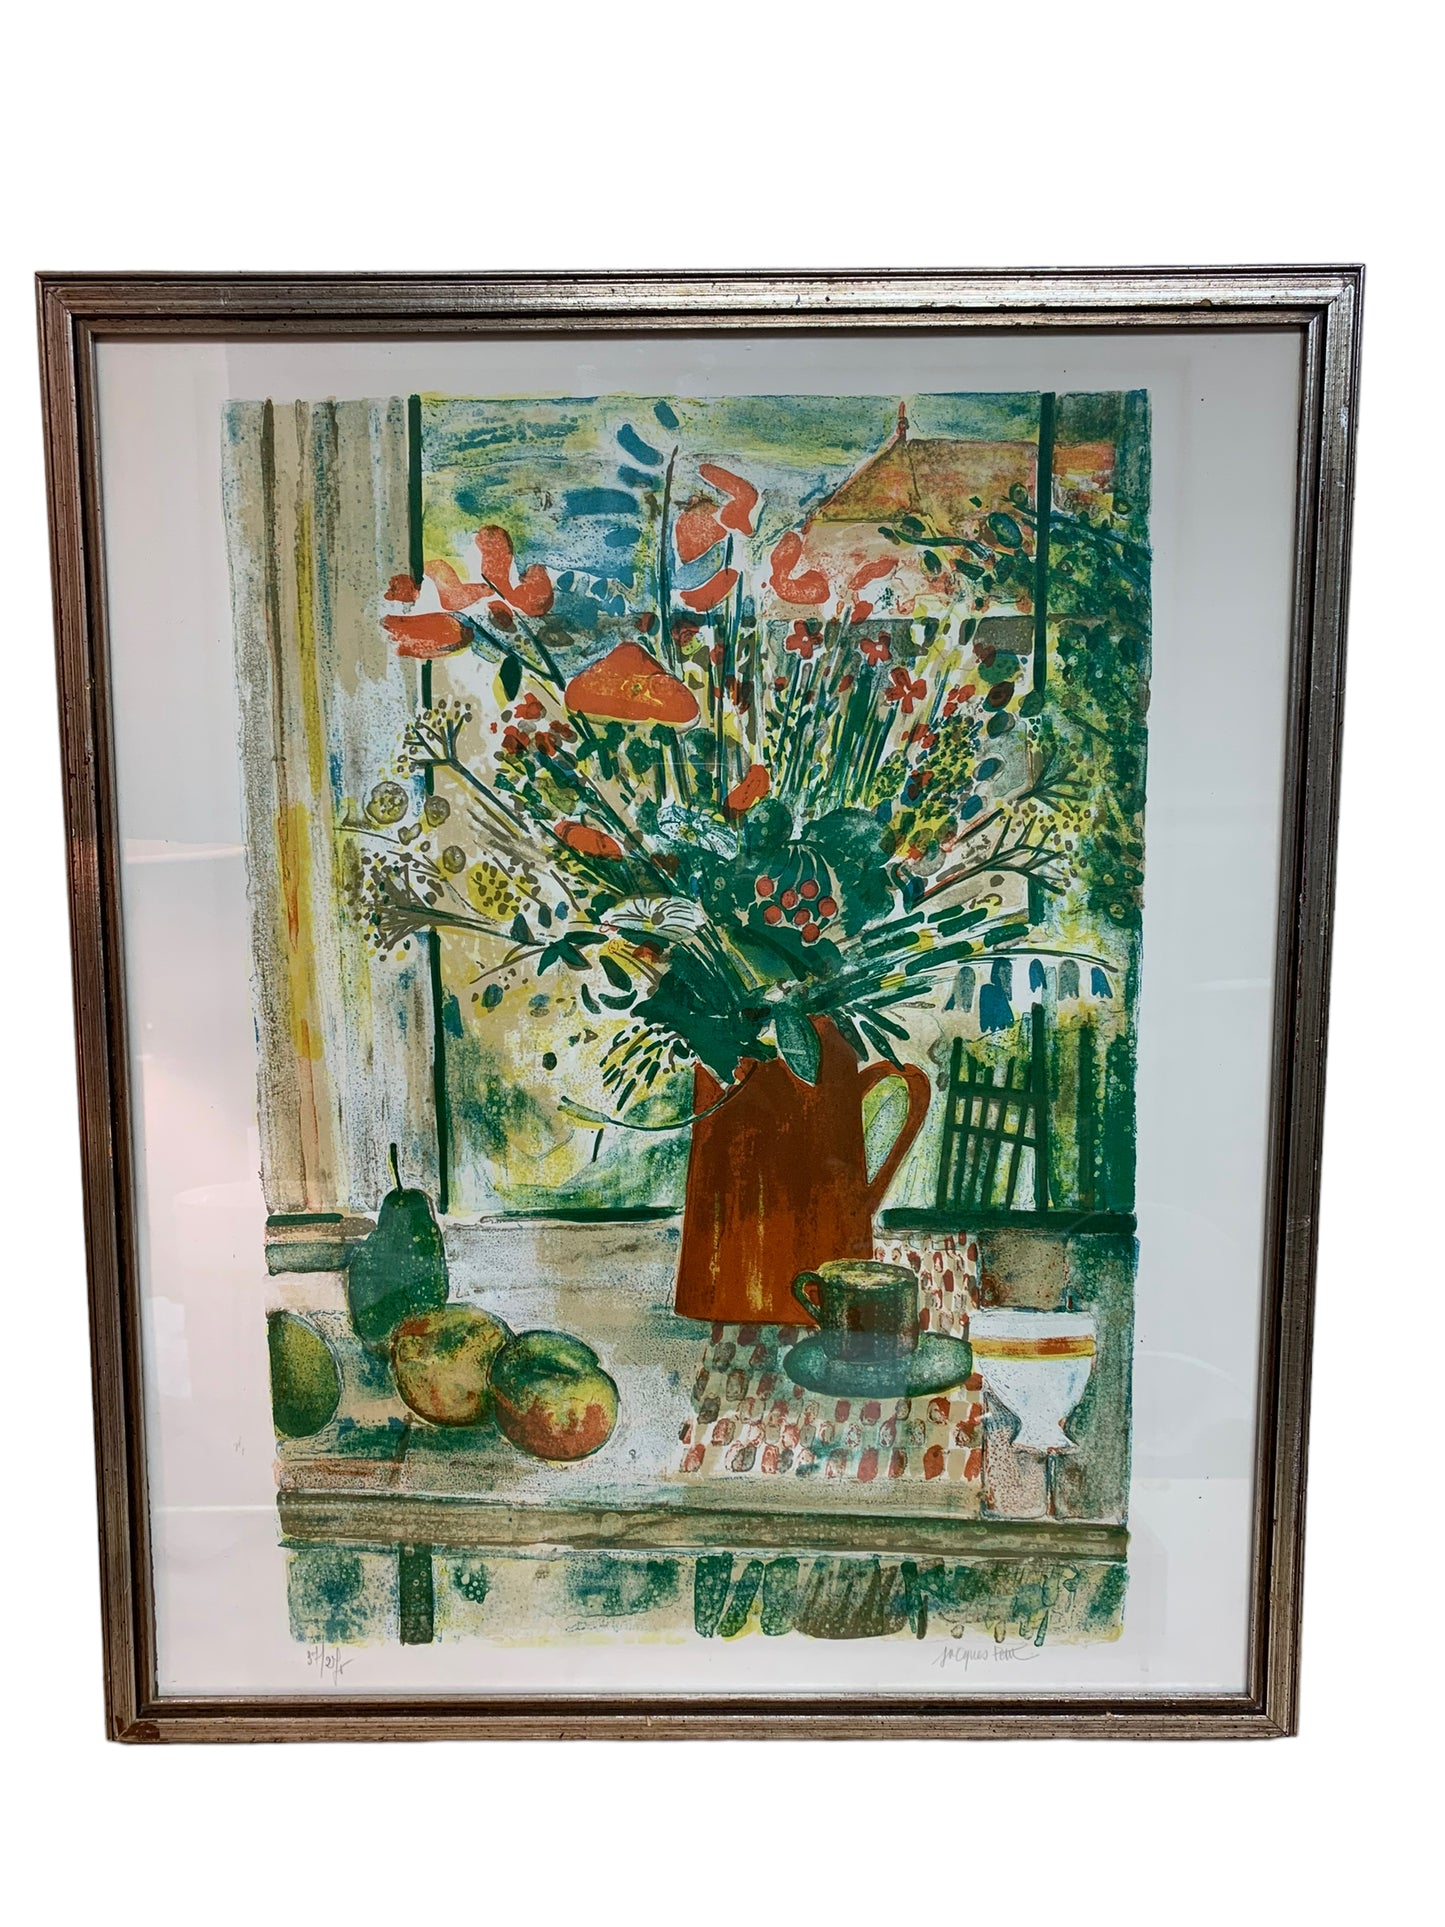 Art Work Vintage Jacques Petit Fleurs des champs Lithograph, DuBOSE Gallery Houston, Artist Signed and Numbered